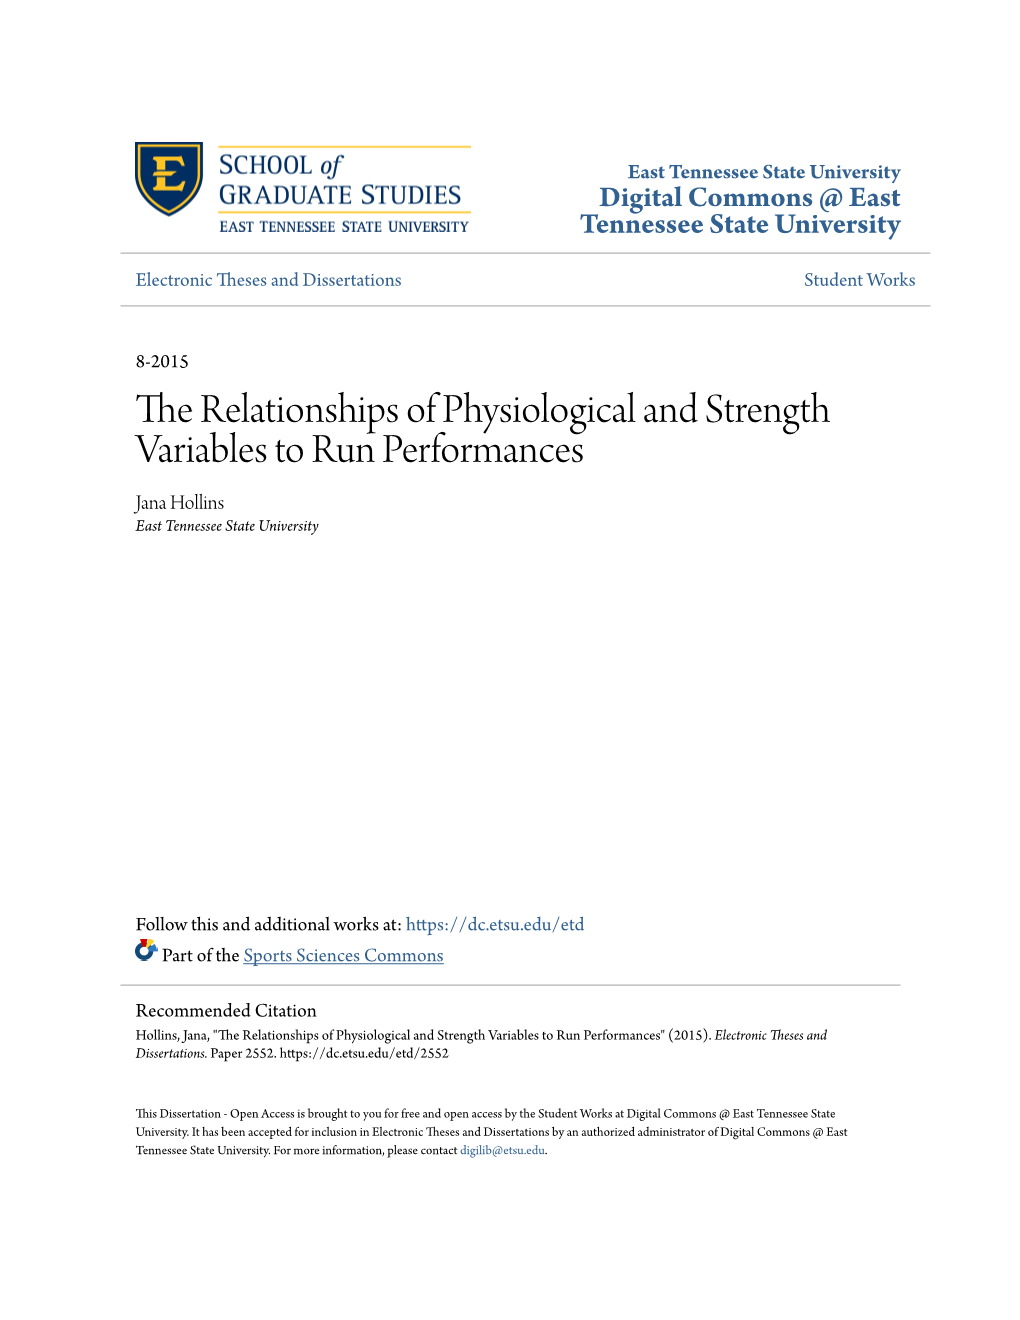 The Relationships of Physiological and Strength Variables to Run Performances Jana Hollins East Tennessee State University